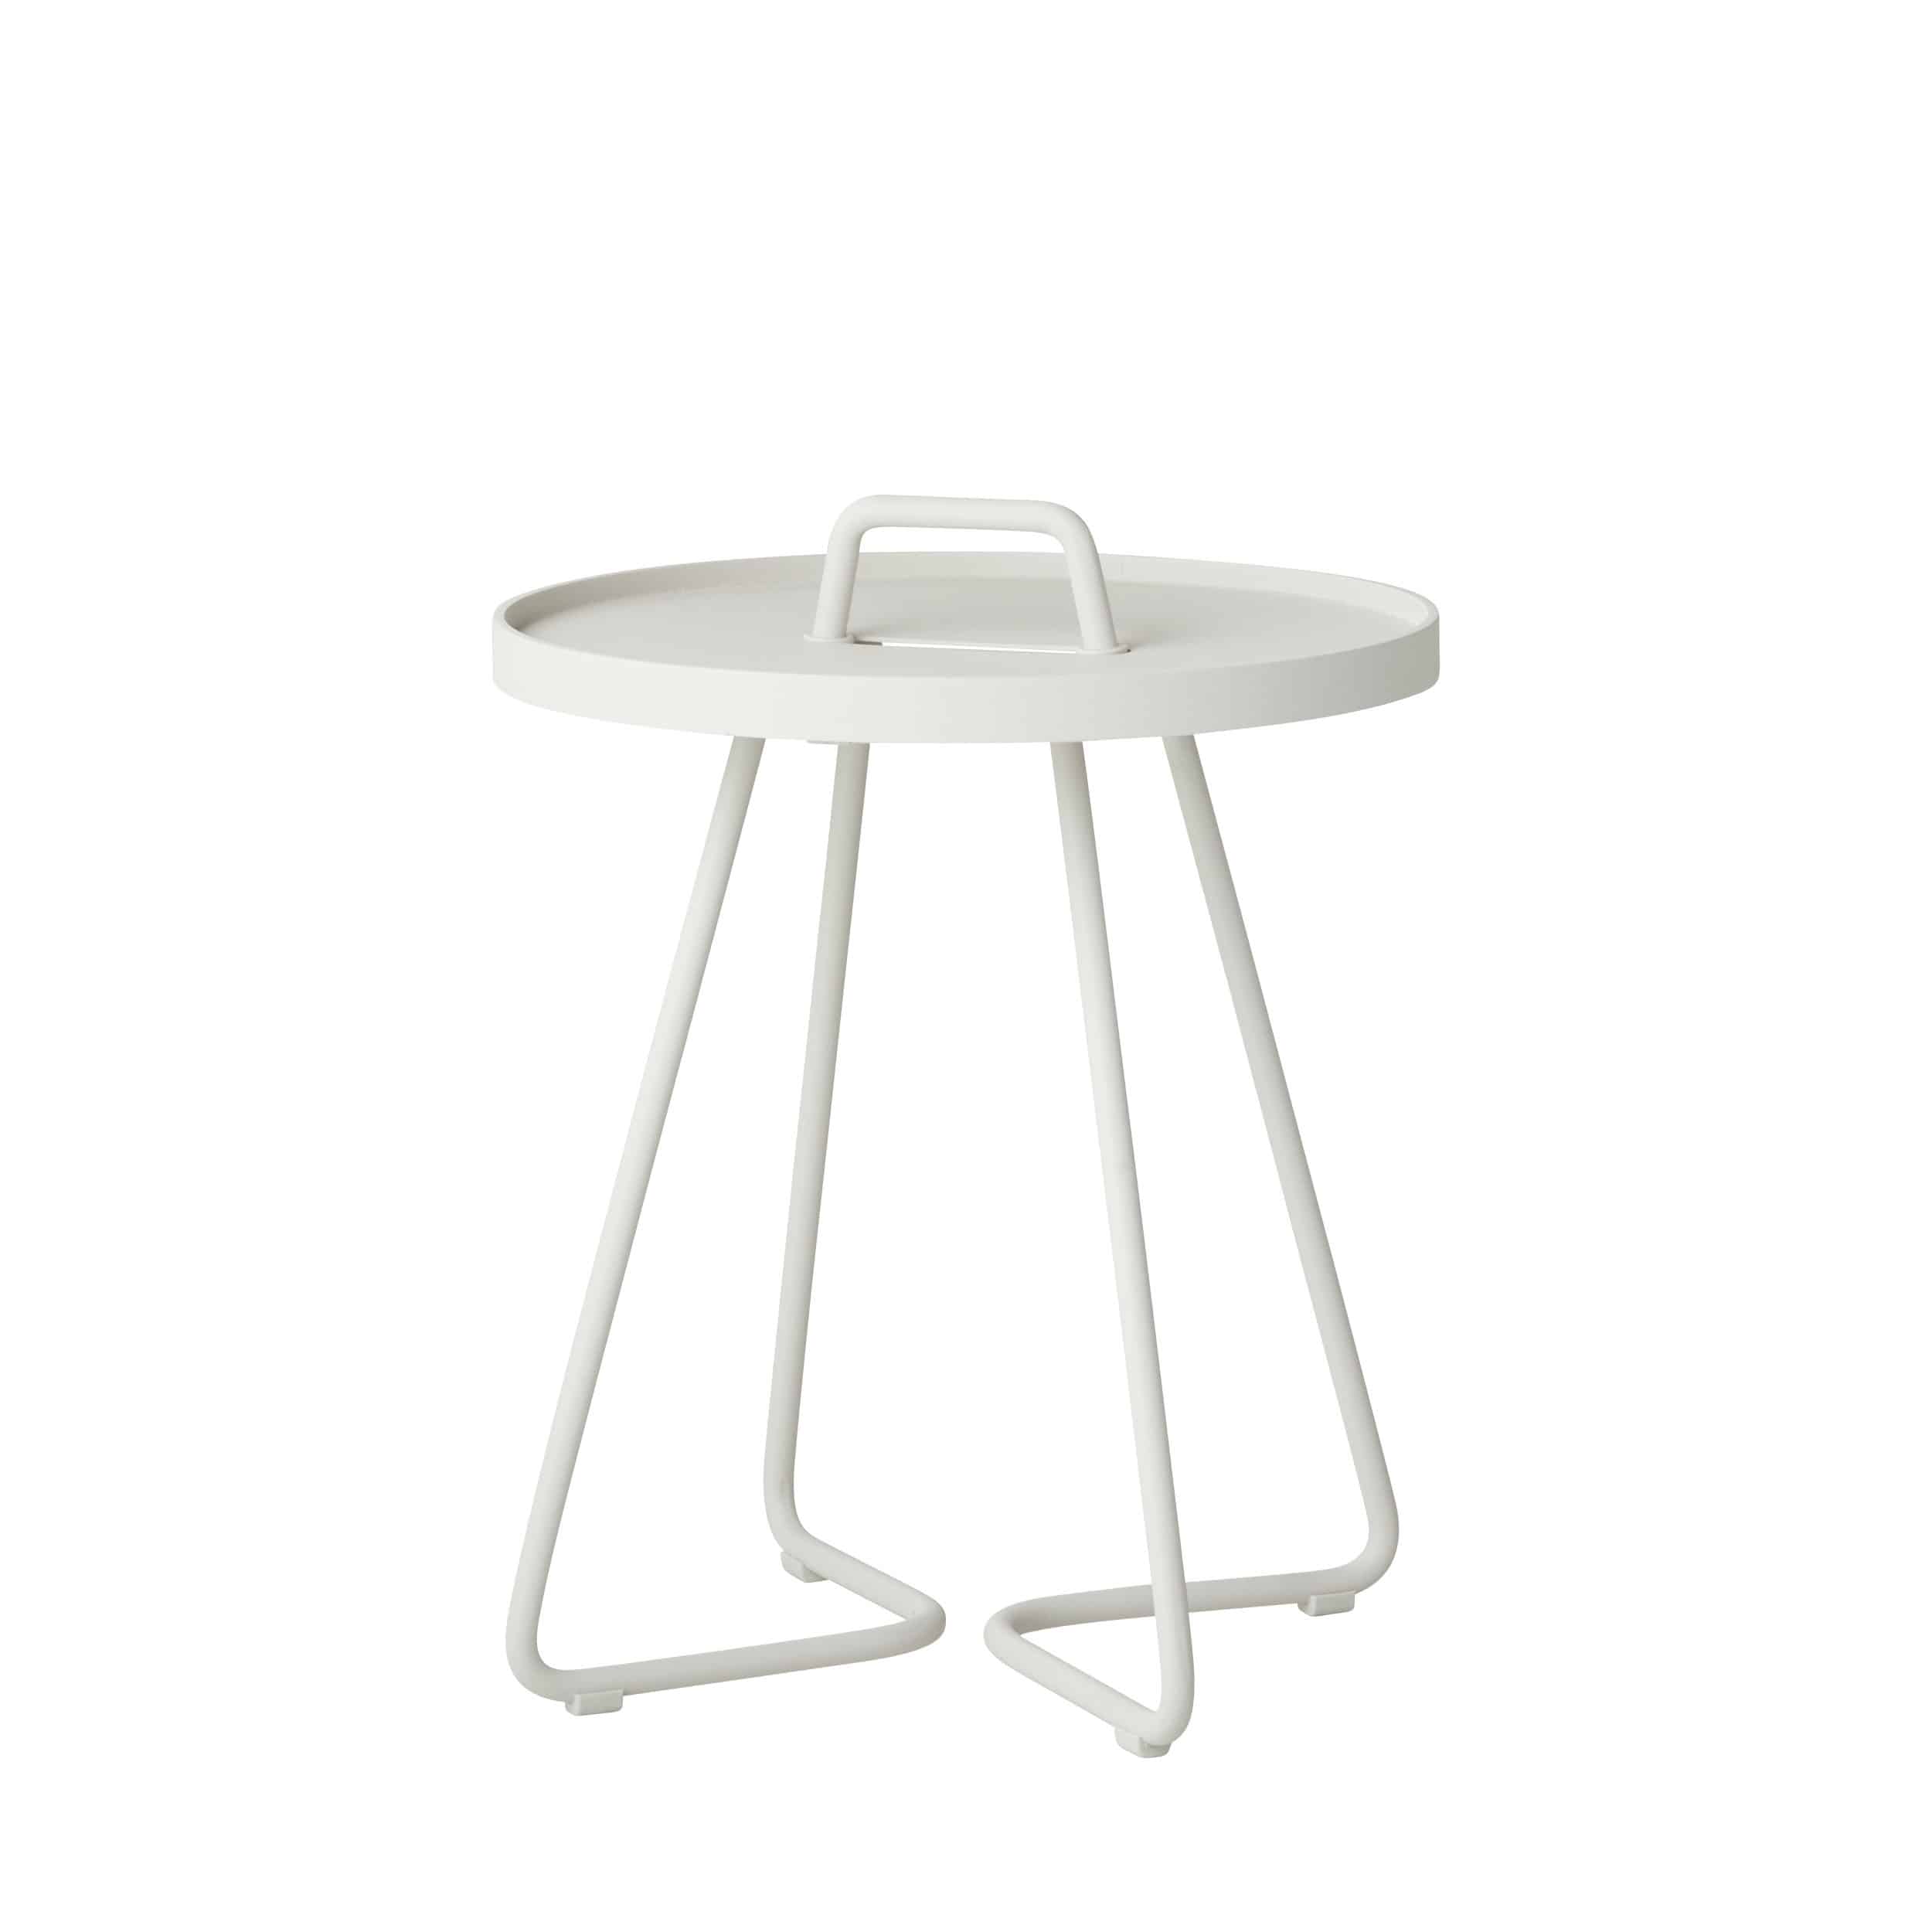 Table d'appoint On the move avec plateau